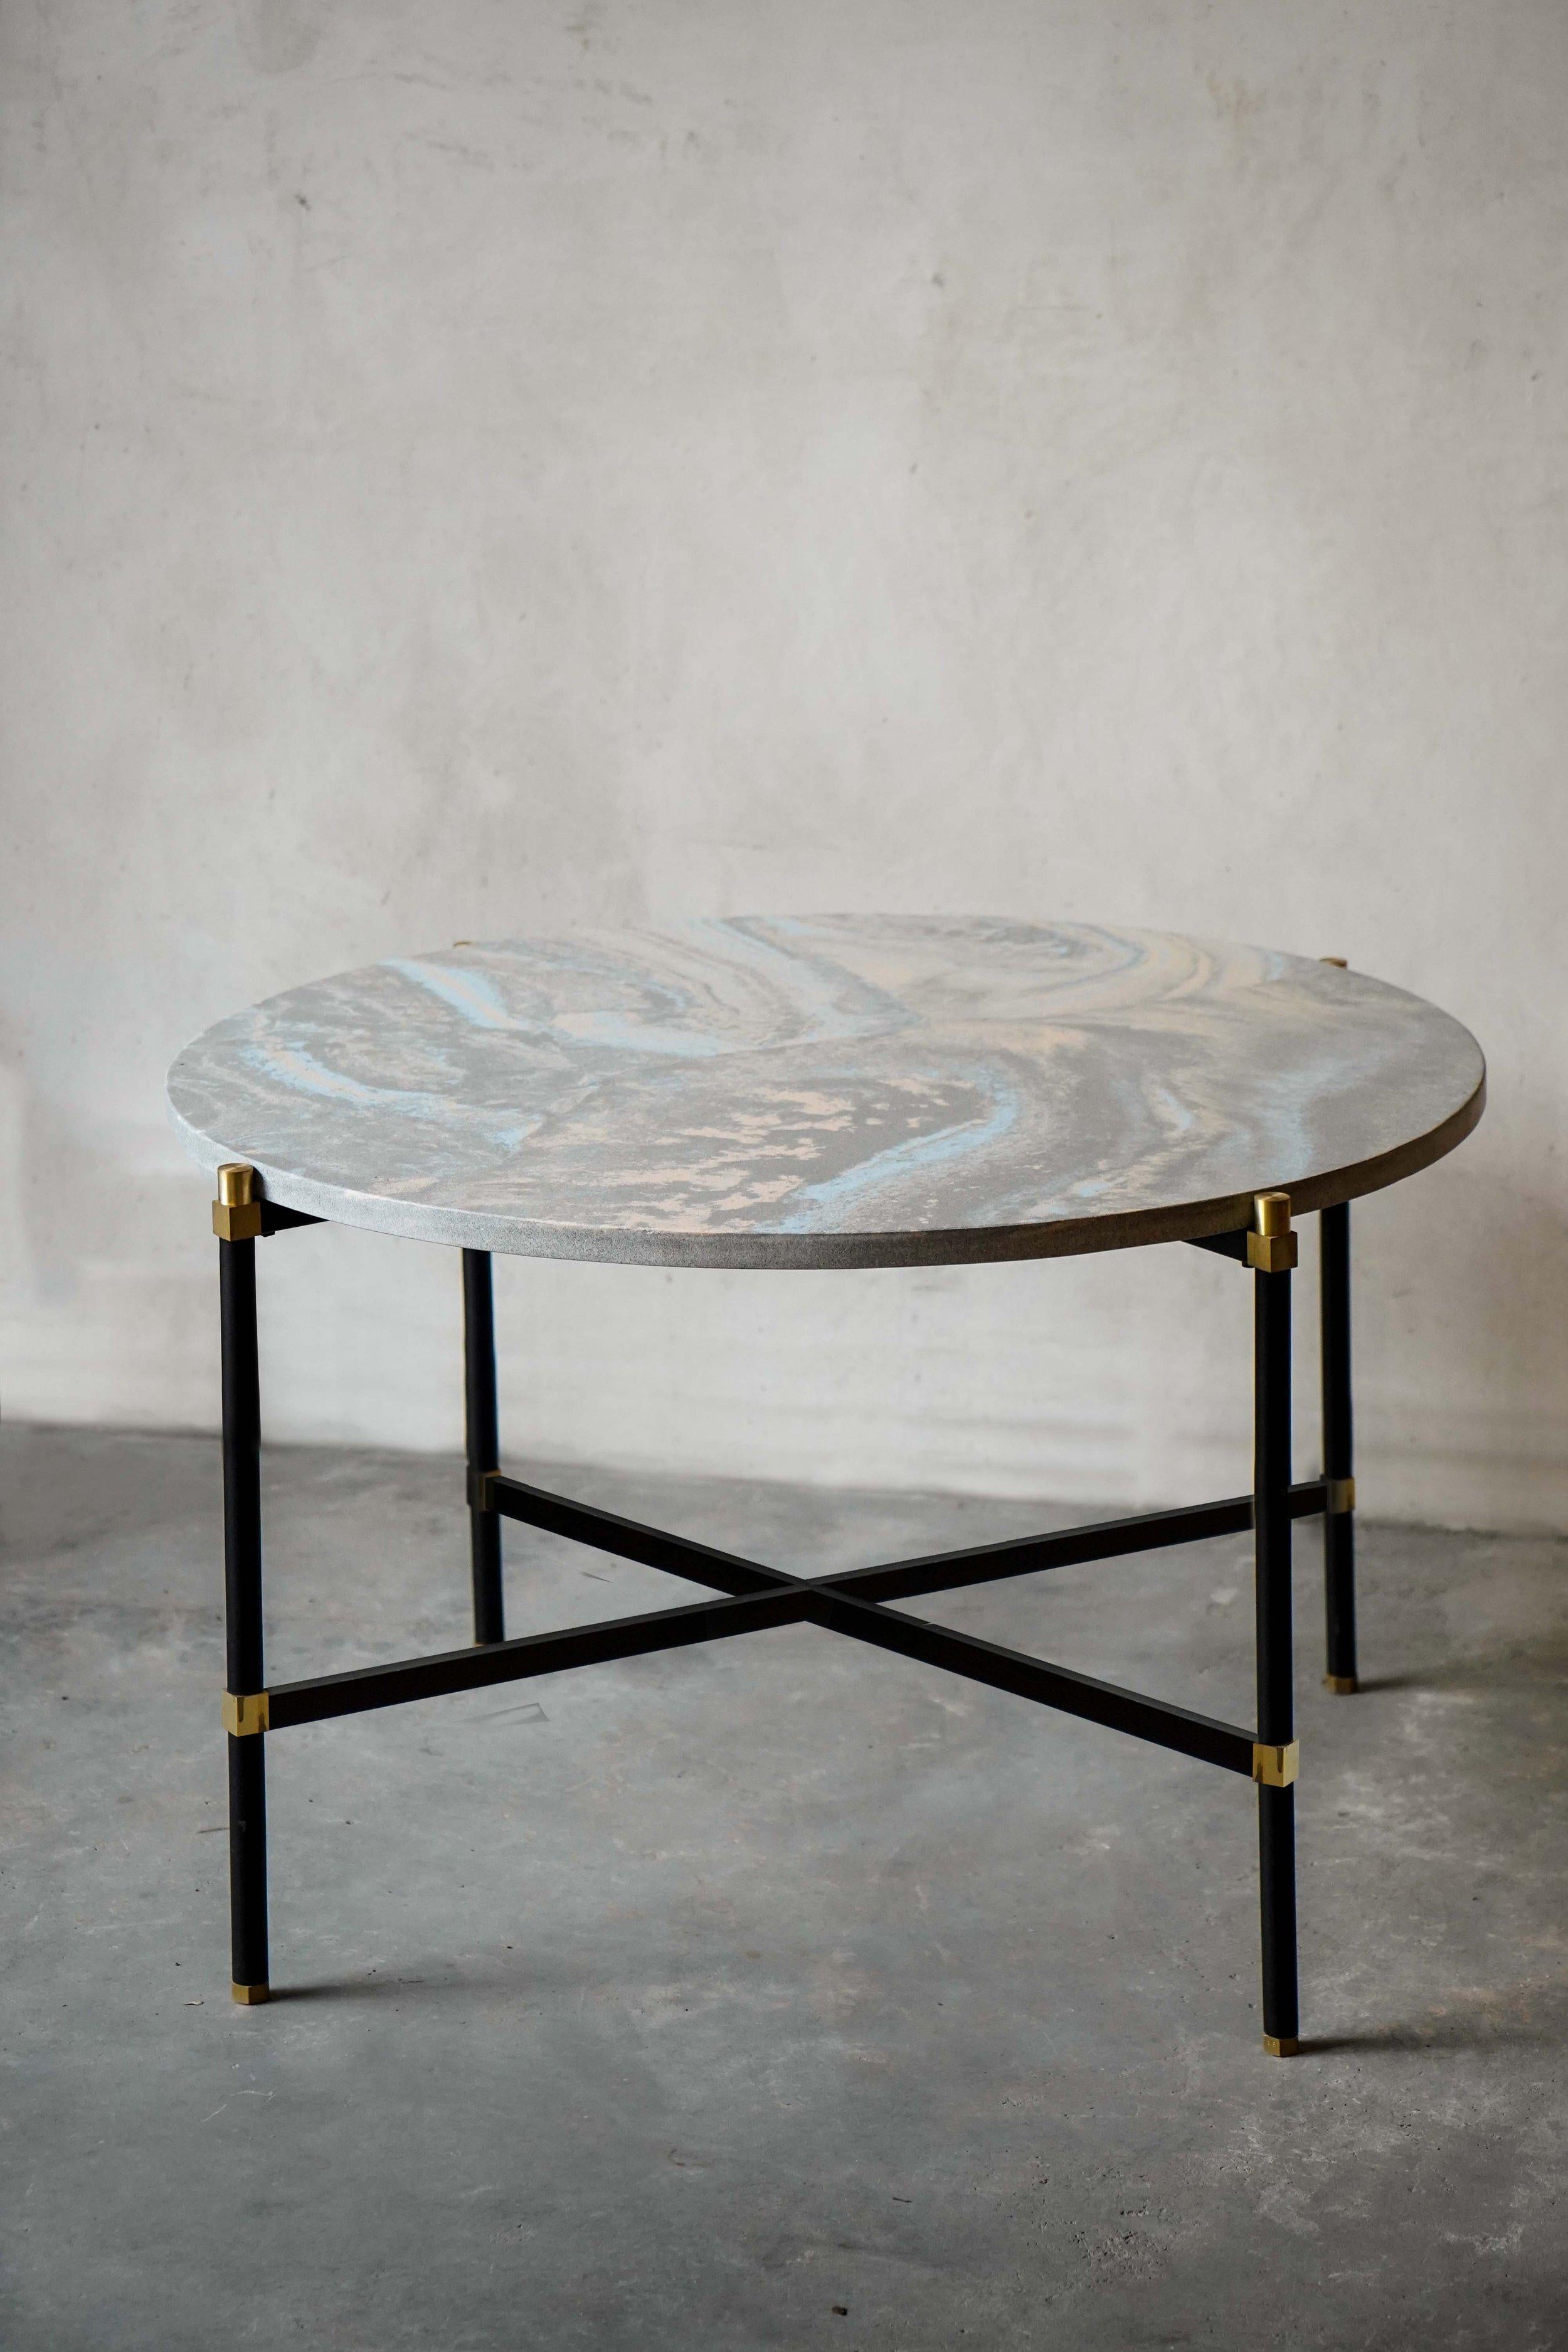 Simple coffee table 80 4 Legs by Contain
Dimensions: D80 x H51 cm 
Materials: Iron, Brass, Terrazzo, Marble, Stone.
Available in different finishes and dimensions.

The Connector furniture collection is based on single assembly pieces that get